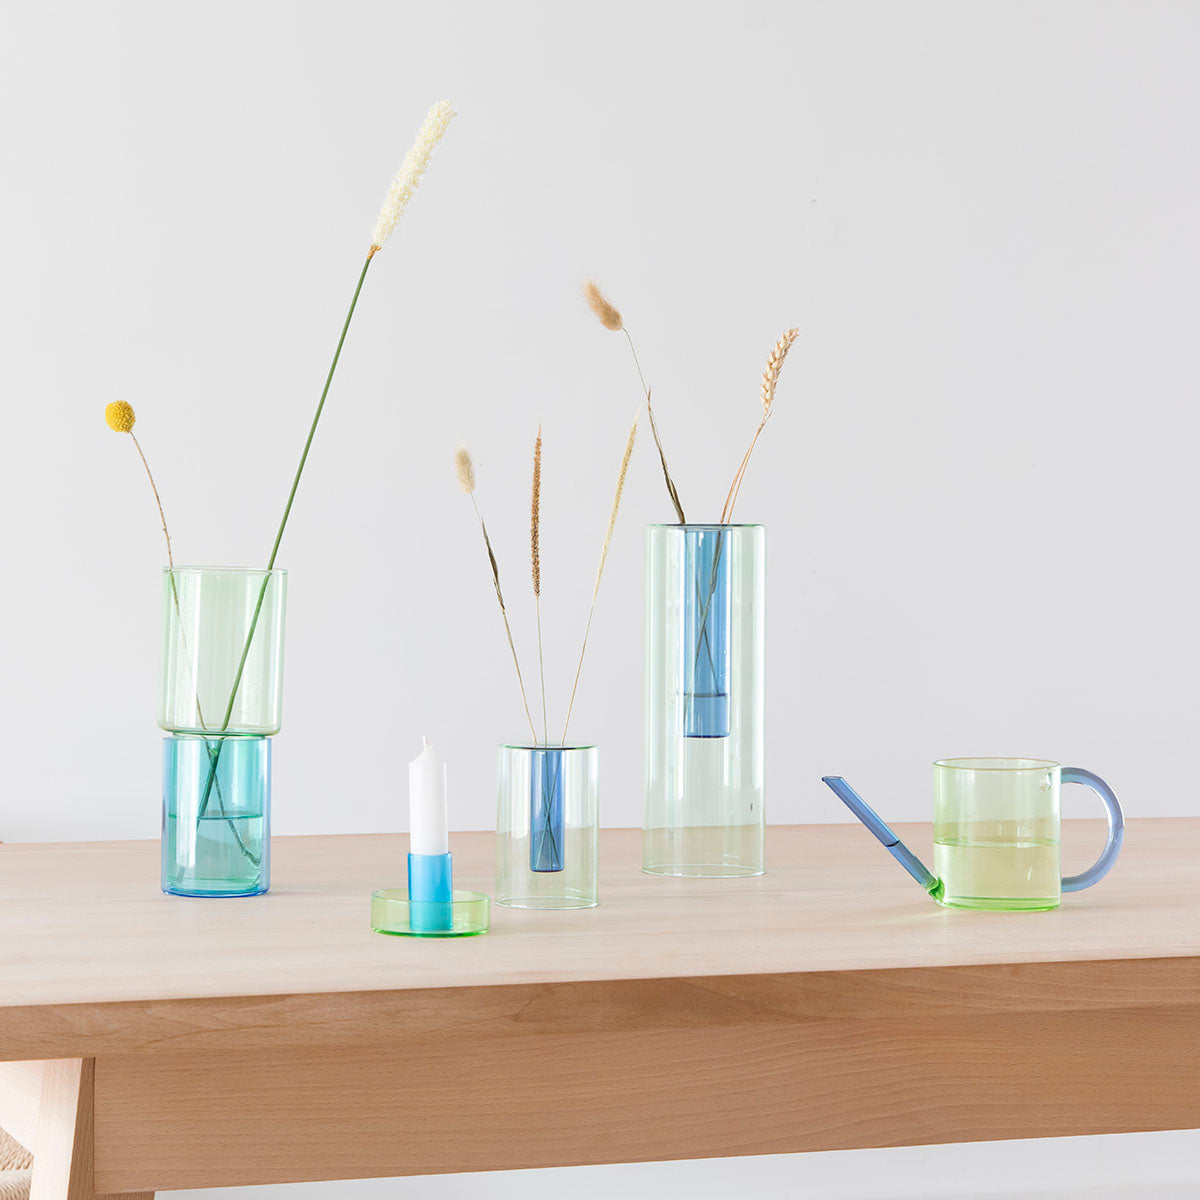 A Small Reversible Vase: Green and Blue and a Watering Can: Green and Blue displayed on a shelf with other vases.